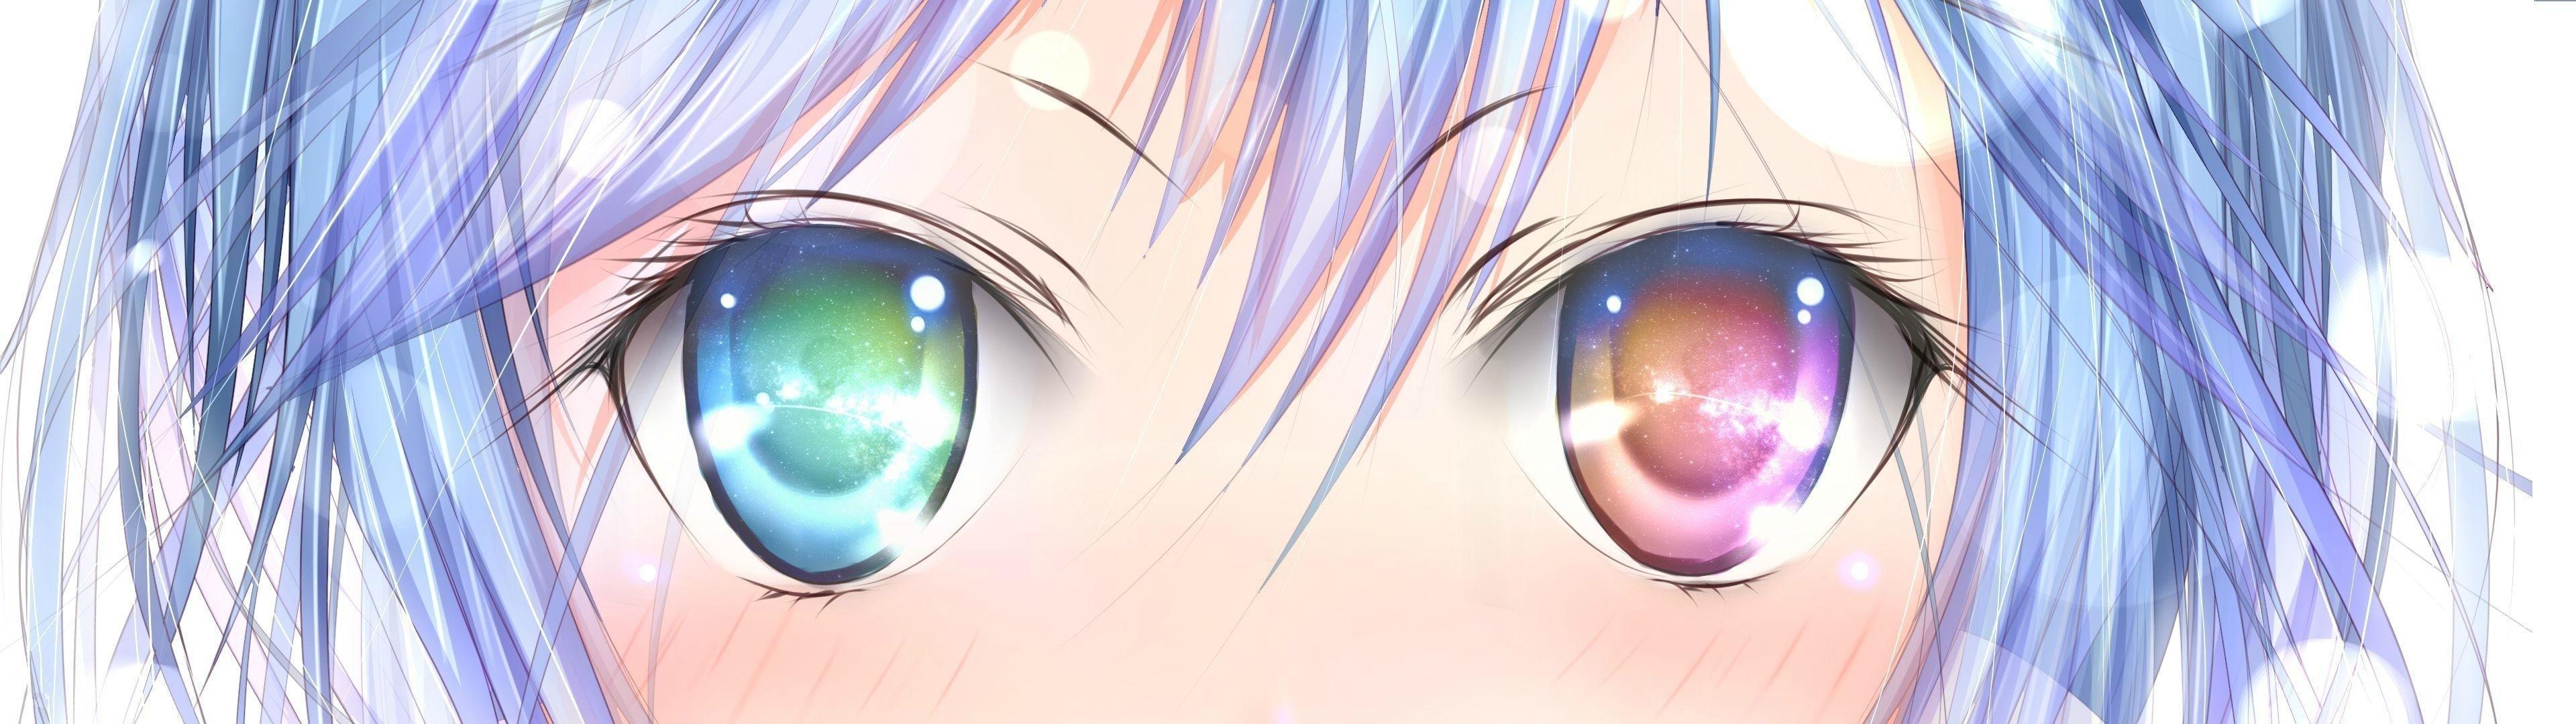 How to Draw Manga Eyes Step by Step Slow Tutorial for Beginners  YouTube